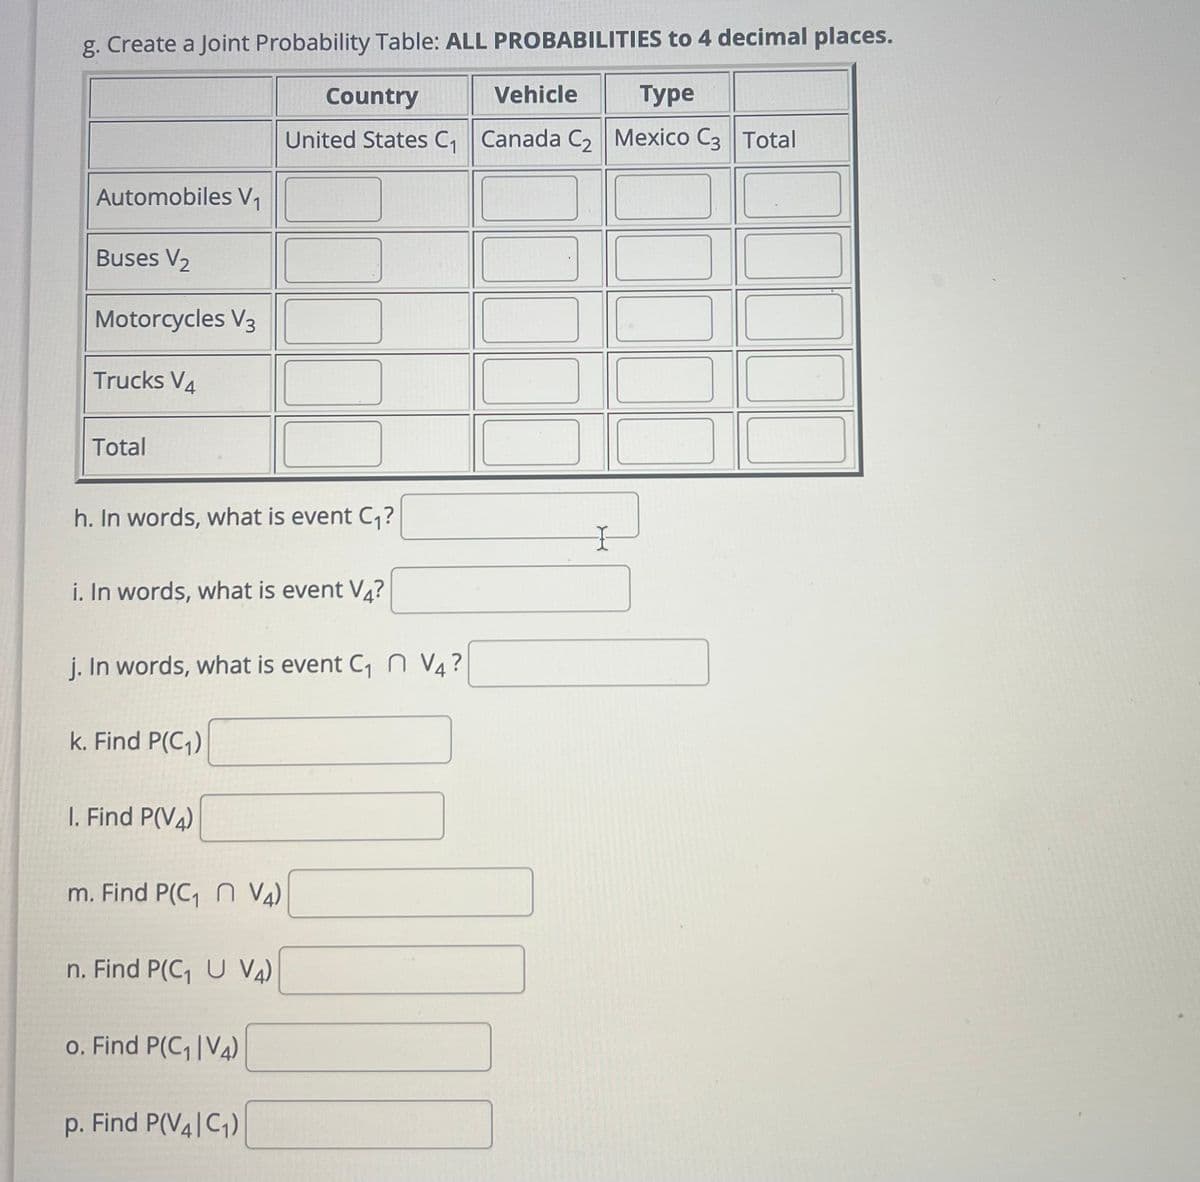 g. Create a Joint Probability Table: ALL PROBABILITIES to 4 decimal places.
Vehicle Type
Automobiles V₁
Buses V₂
Motorcycles V3
Trucks V4
Total
h. In words, what is event C₁₂?
i. In words, what is event V4?
j. In words, what is event C₁ n V4?
k. Find P(C₁)
I. Find P(V4)
m. Find P(C₁n V4)
Country
United States C₁ Canada C₂
n. Find P(C₁ U V4)
o. Find P(C₁ |V4)
p. Find P(V4|C₁)
I
Mexico C3 Total